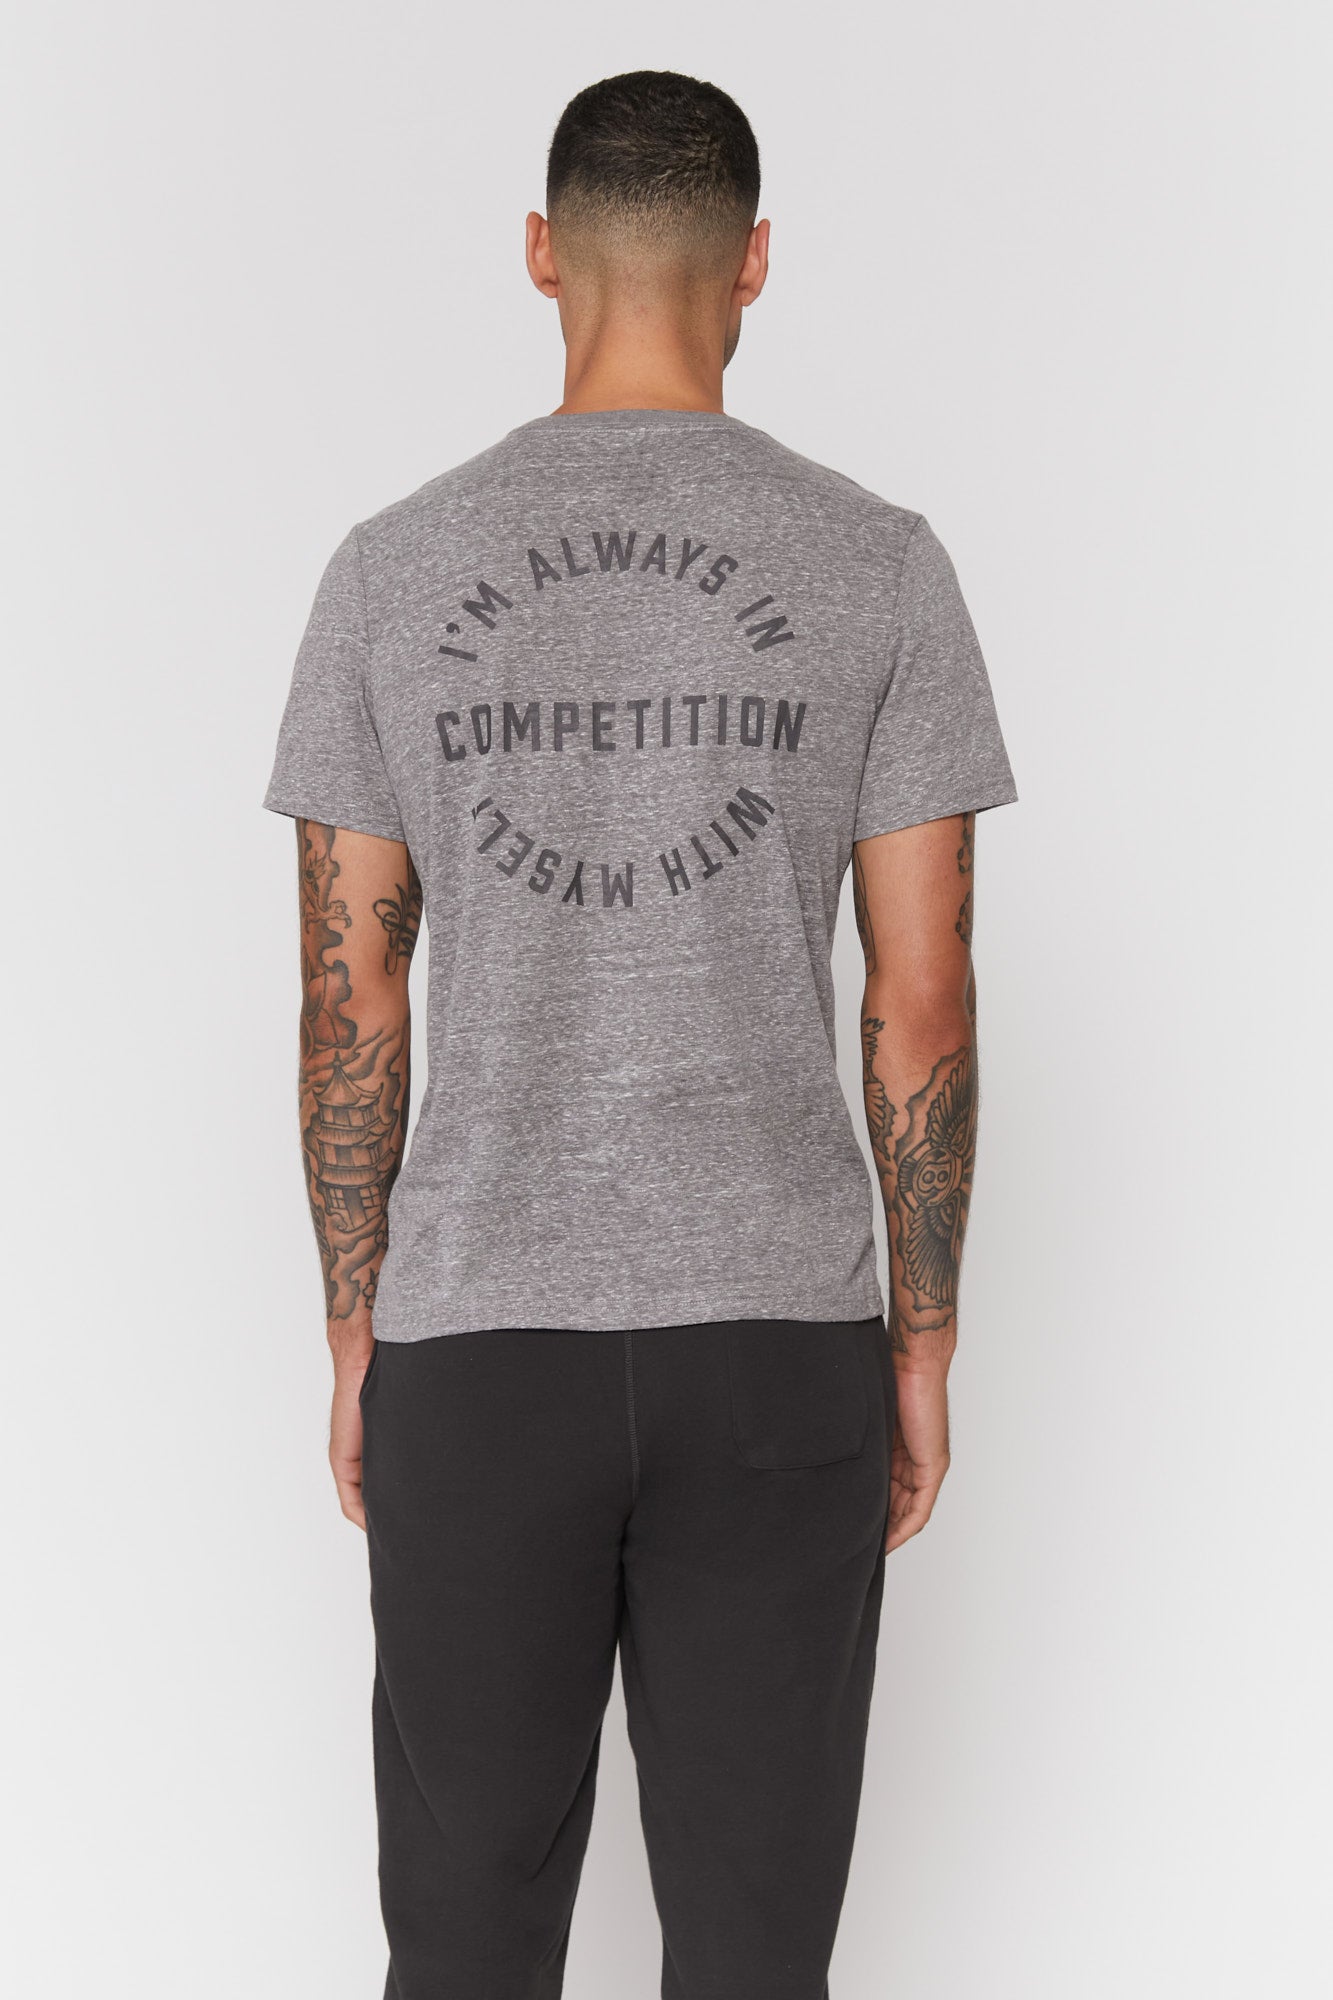 Religion of Sports X Spiritual Gangster Competition Tee